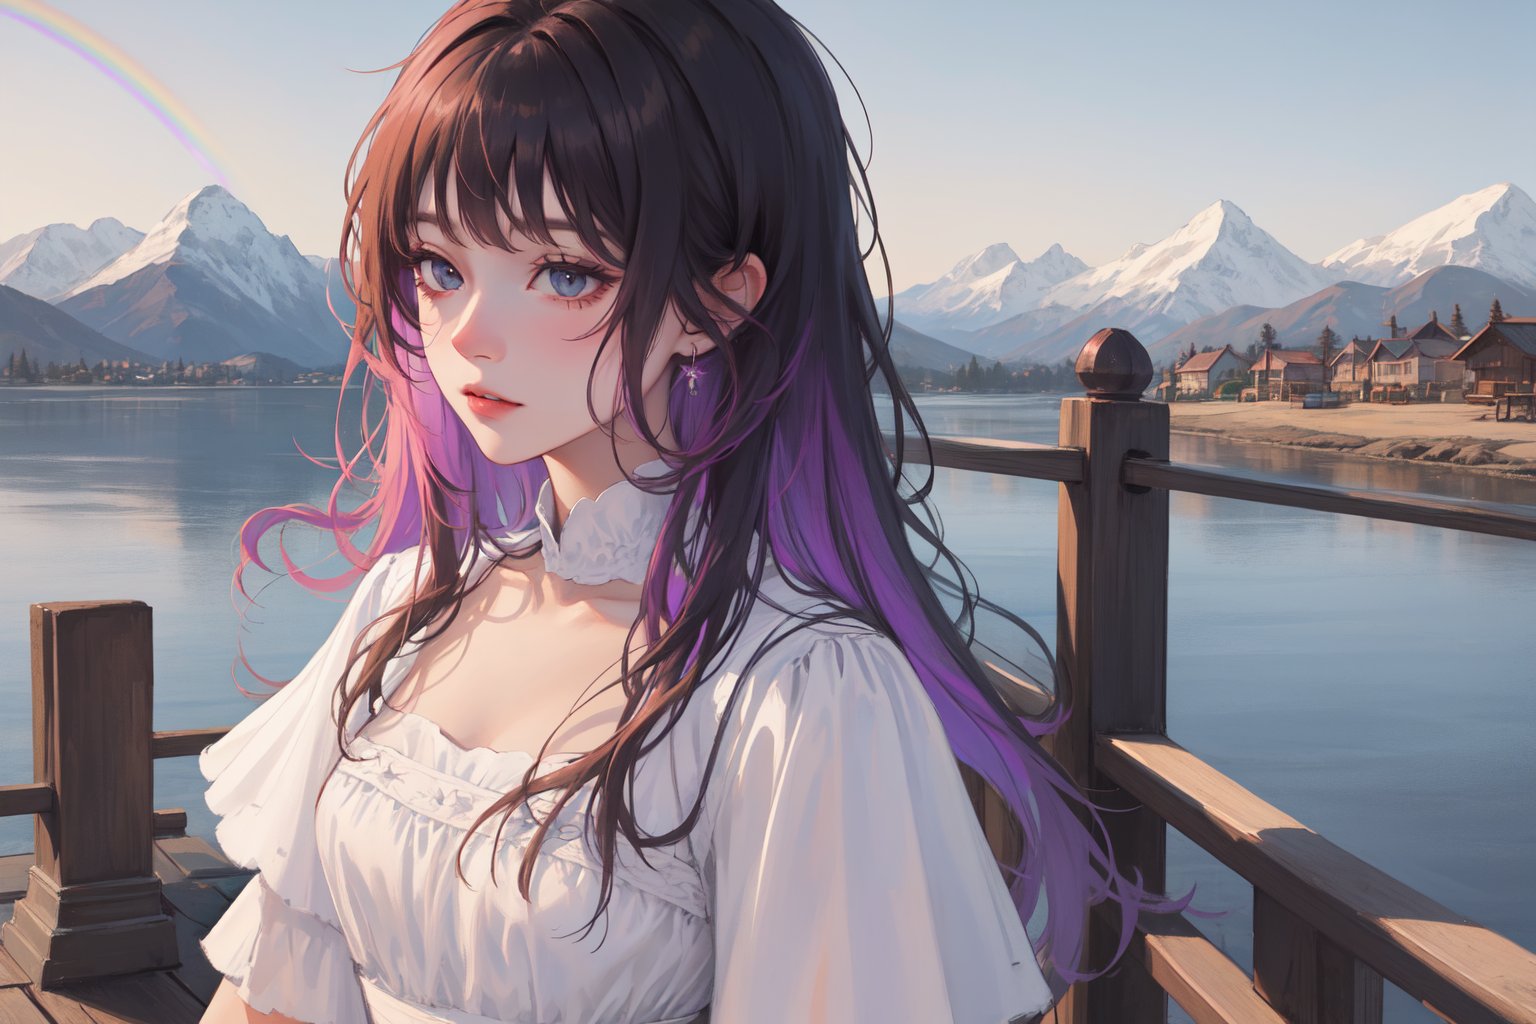 masterpiece, extremely detailed, highly detailed, best quality, a lot of details, 1 girl, colorful hair color,  mountains background, rainbow lights, colorful, white aesthetic dress